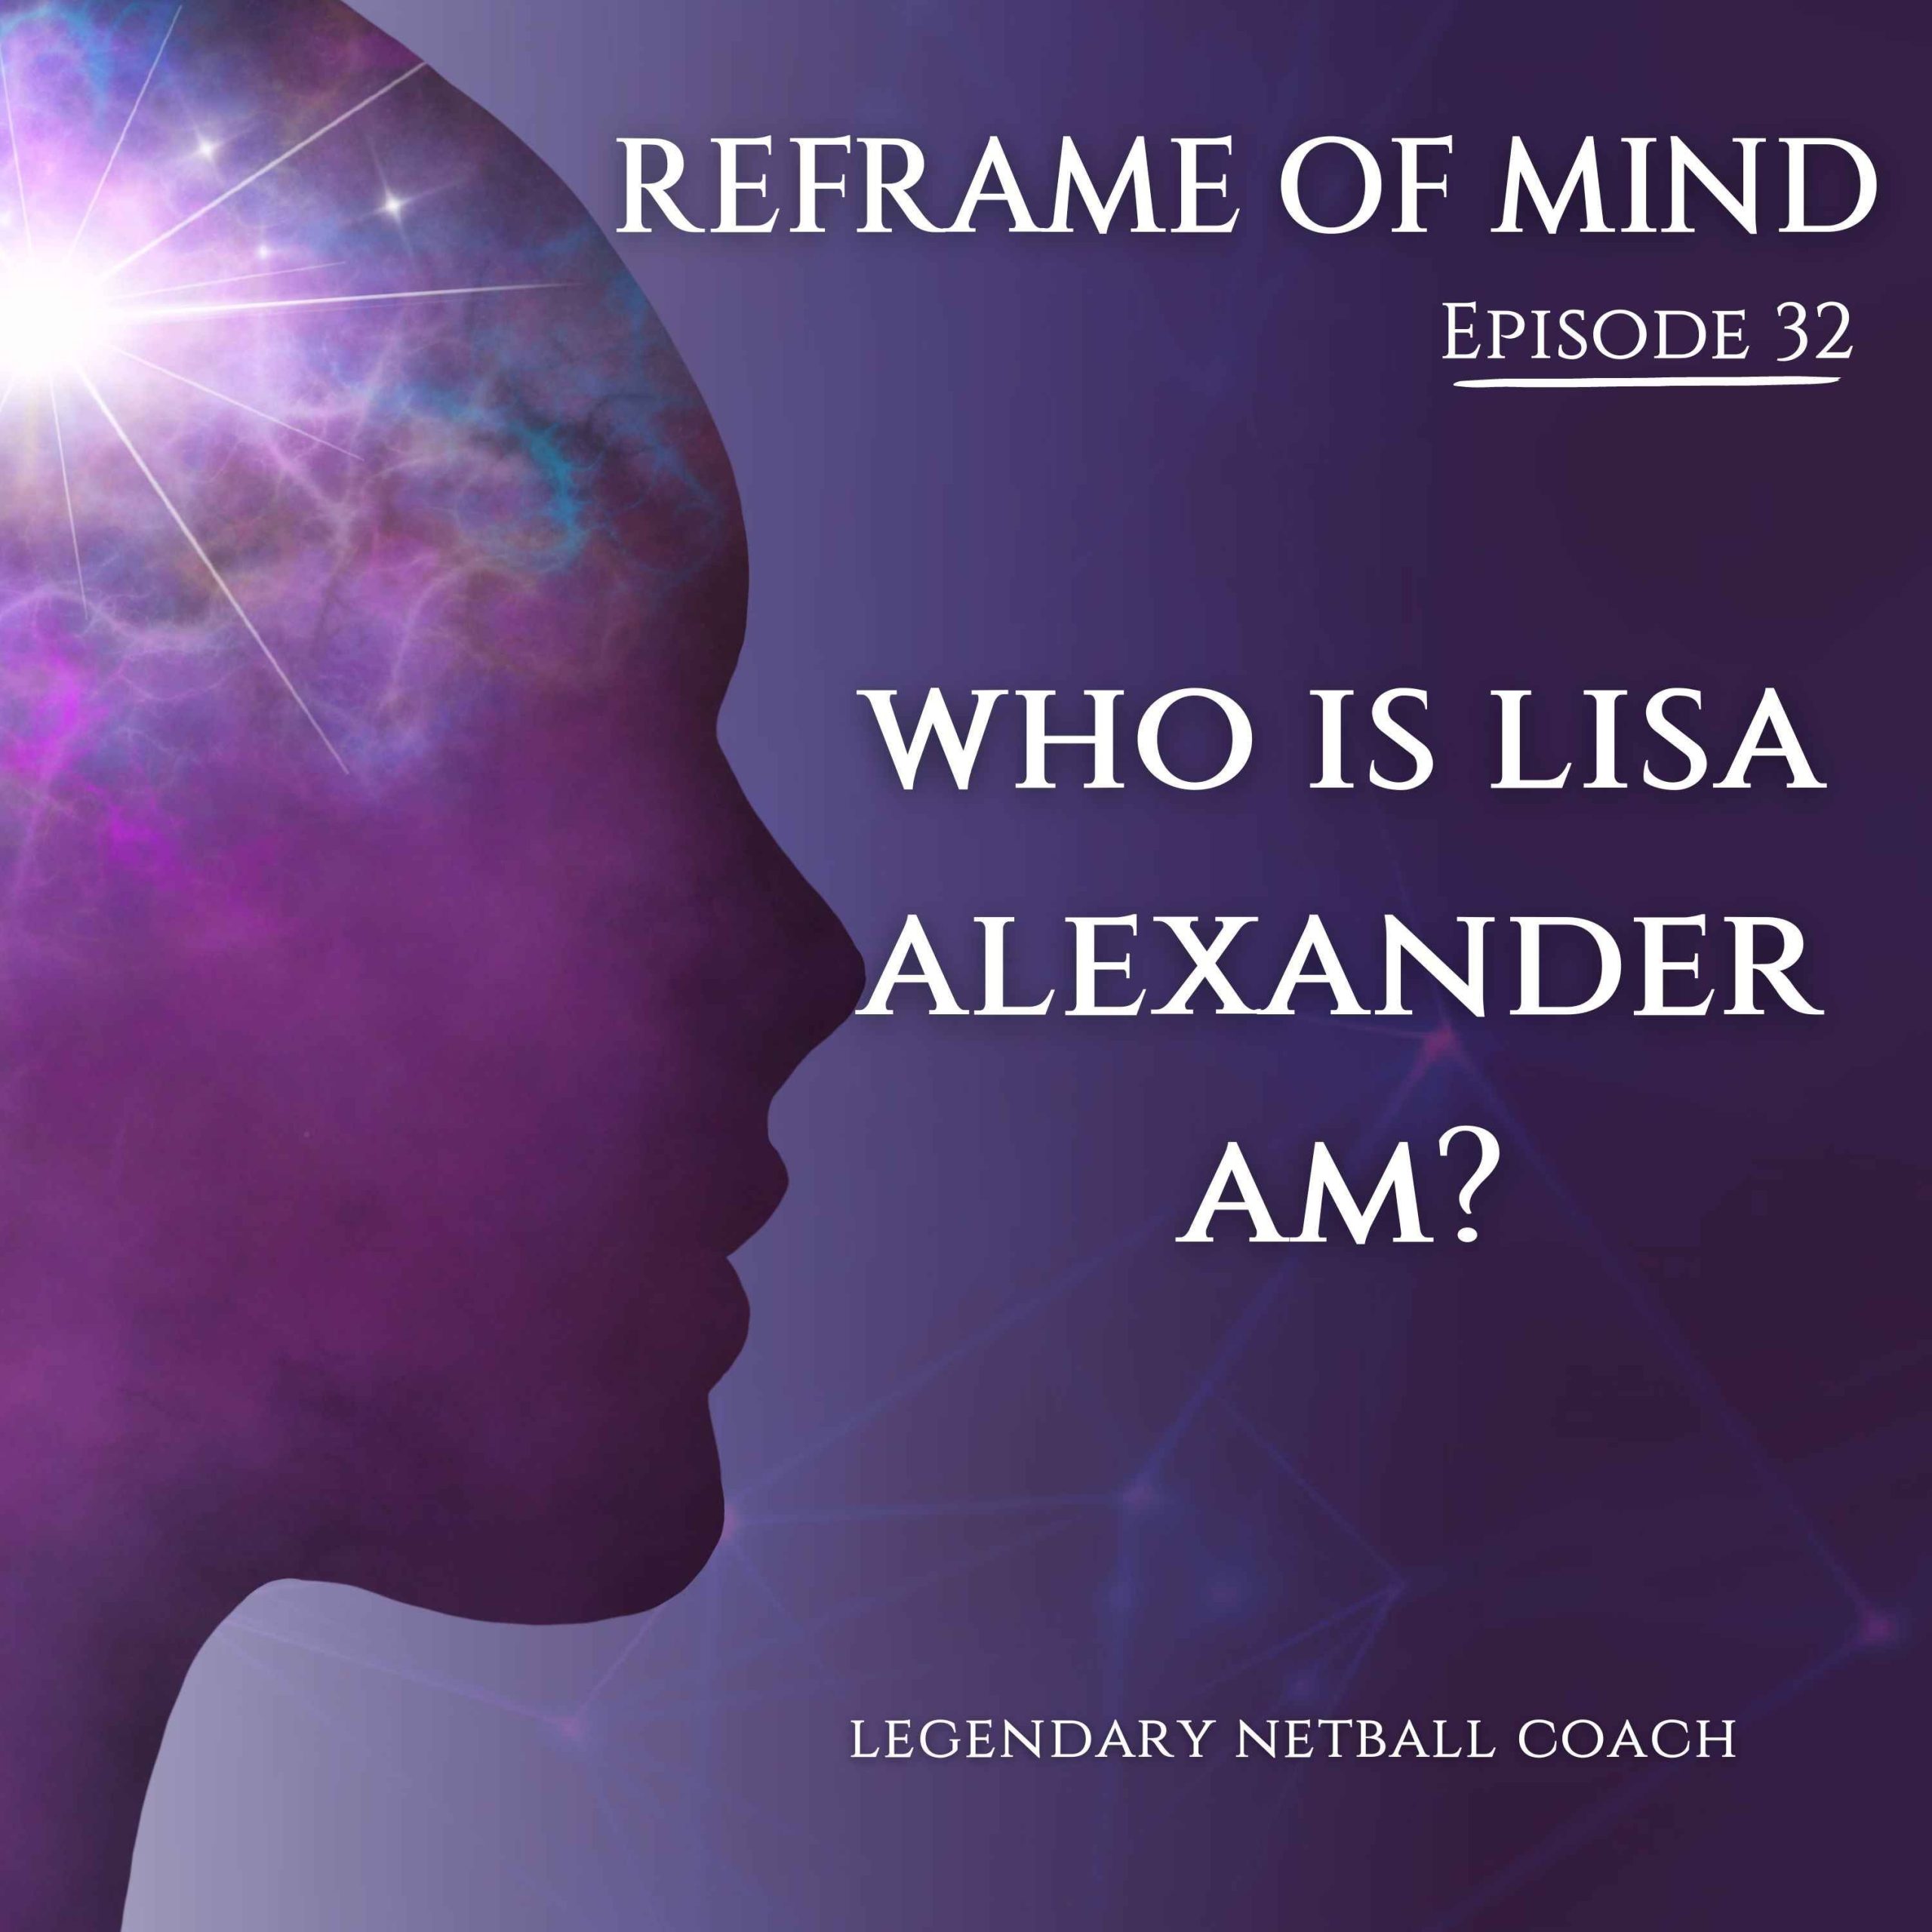 Who is Lisa Alexander AM?